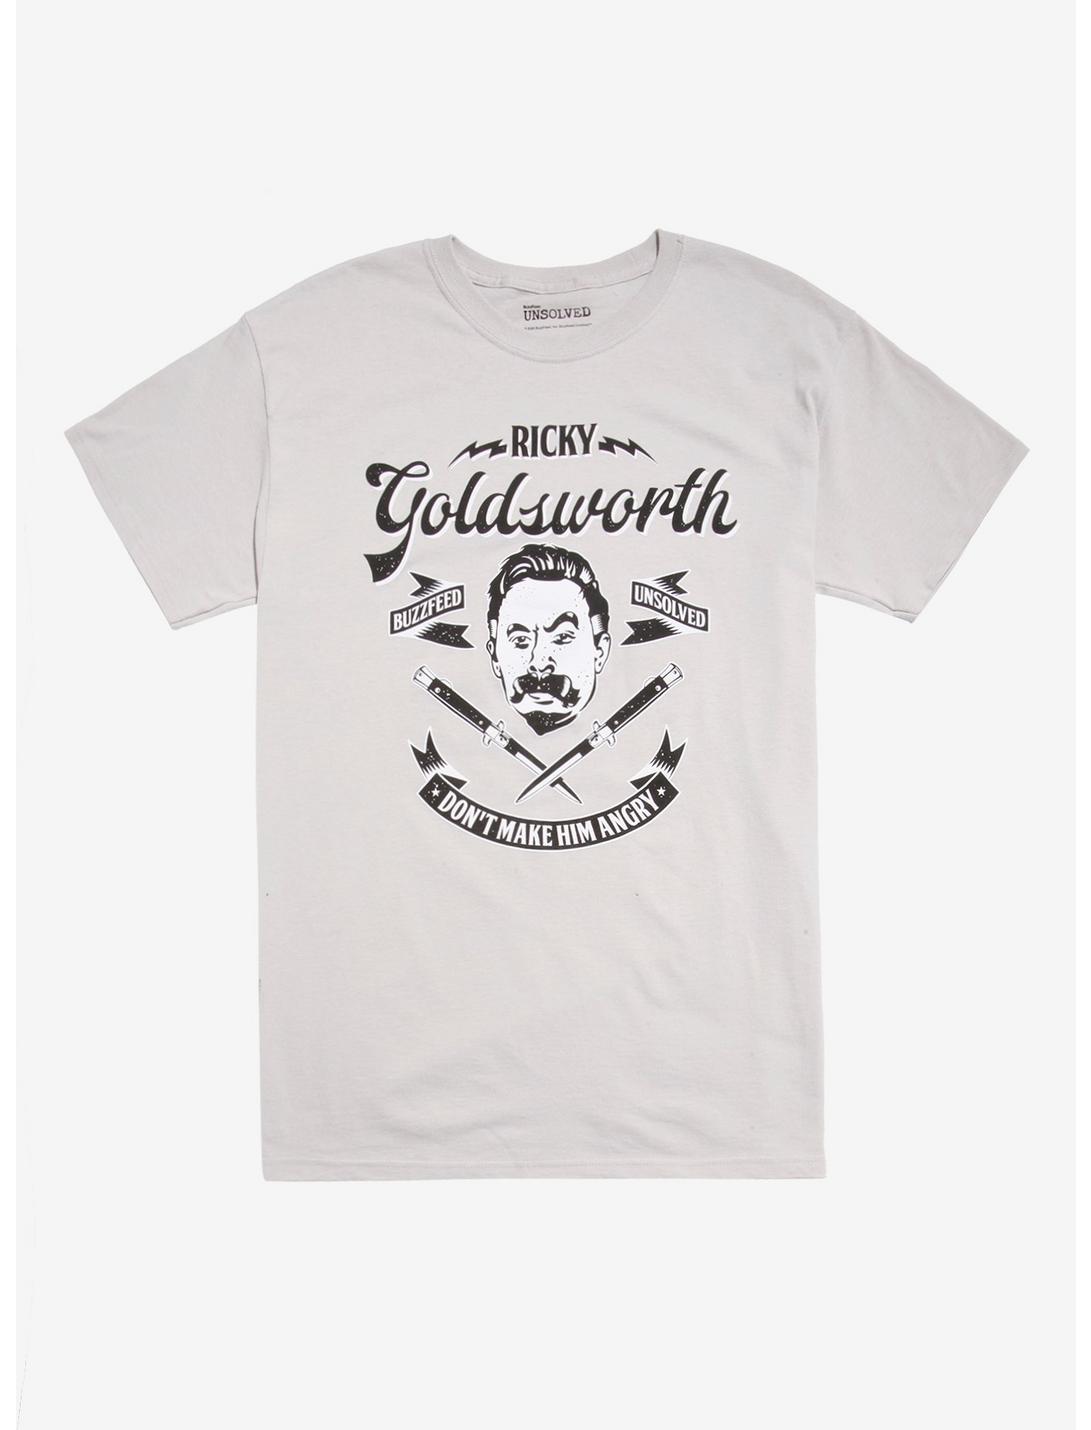 Buzzfeed Unsolved Ricky Goldsworth T-Shirt, GREY, hi-res